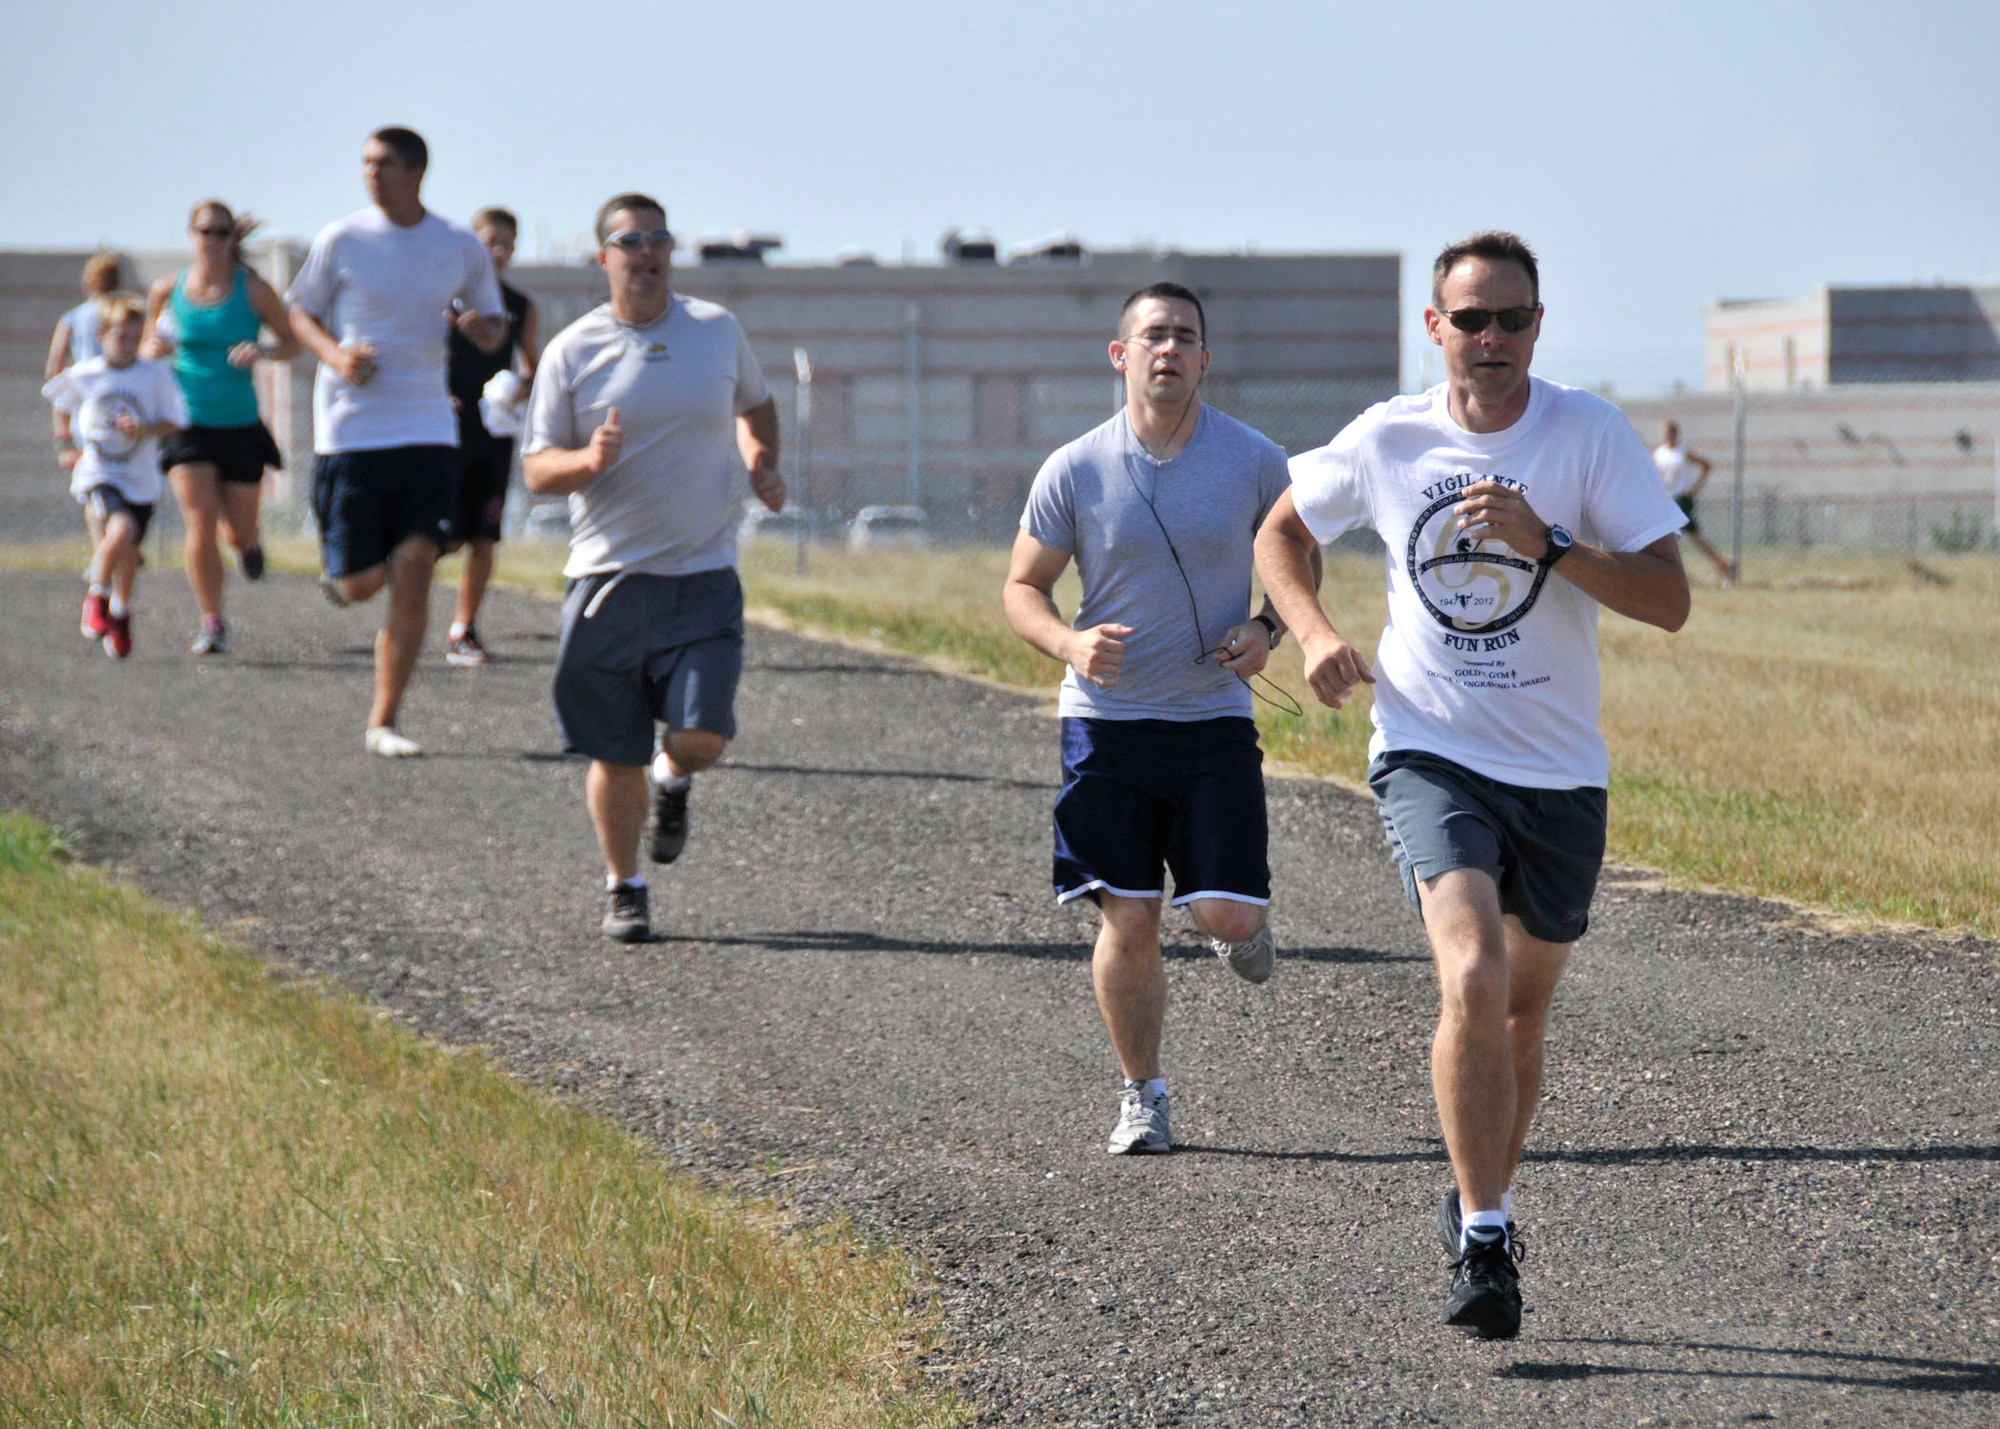 Master Sgt. Brian Bickel leads a group of runners during the Montana Air National Guard Family Day fun run on Aug. 11, 2012. (U.S. Air Force photo/Staff Sgt. John Turner)